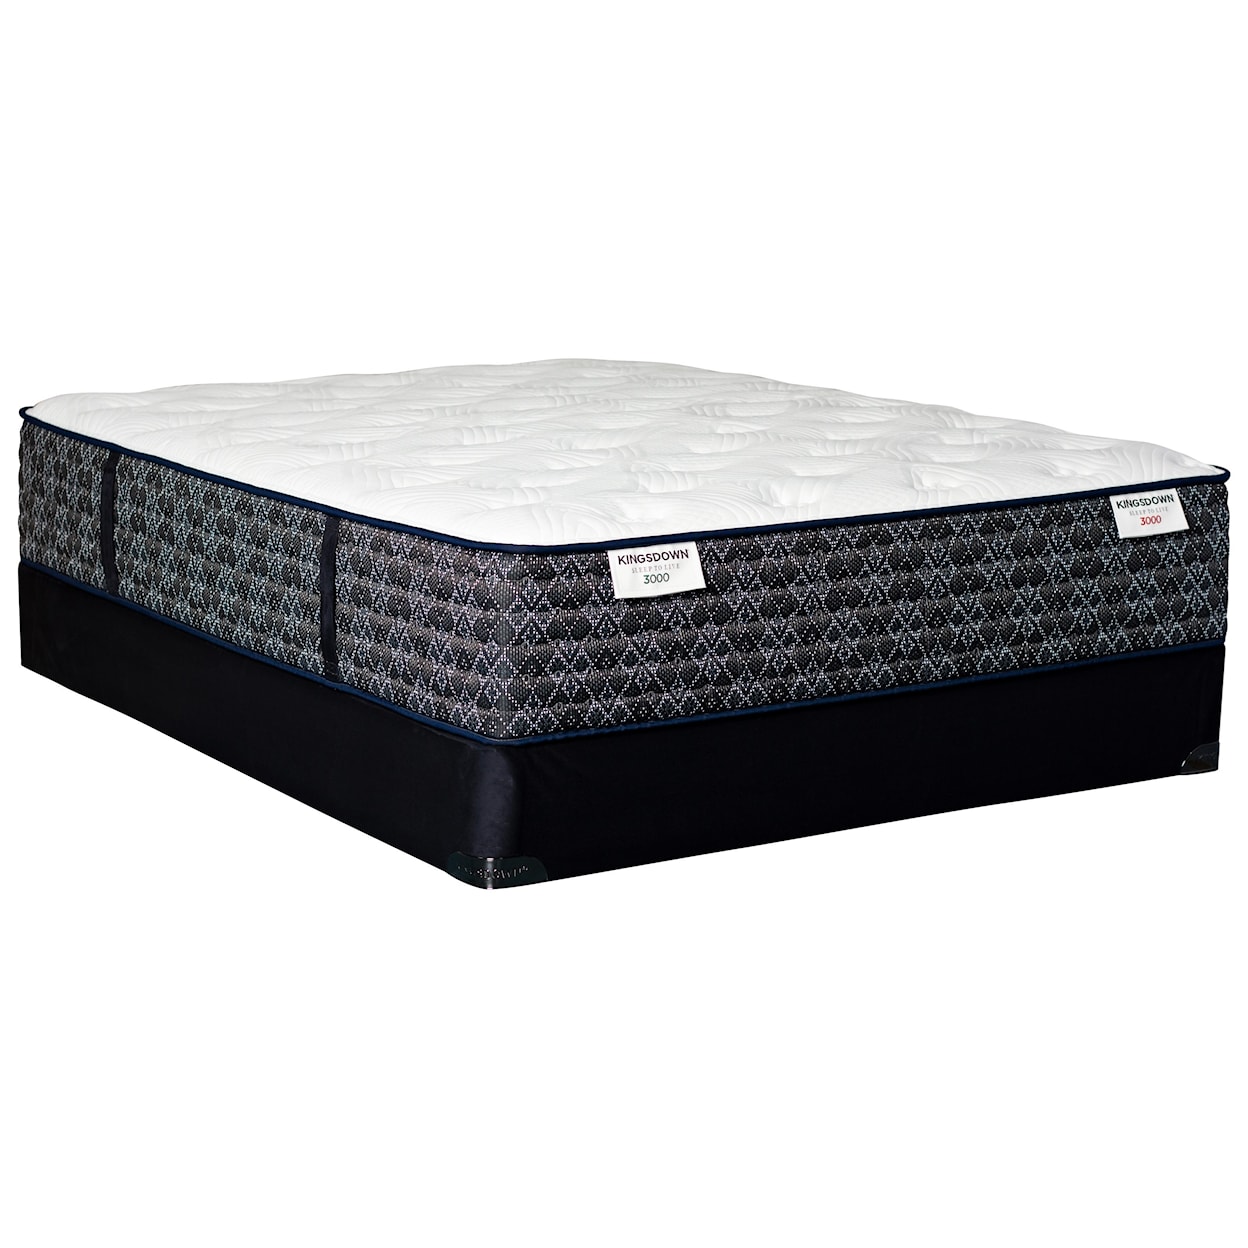 Kingsdown Sleep to Live 3000 Green Red King Pocketed Coil Mattress LoPro Set